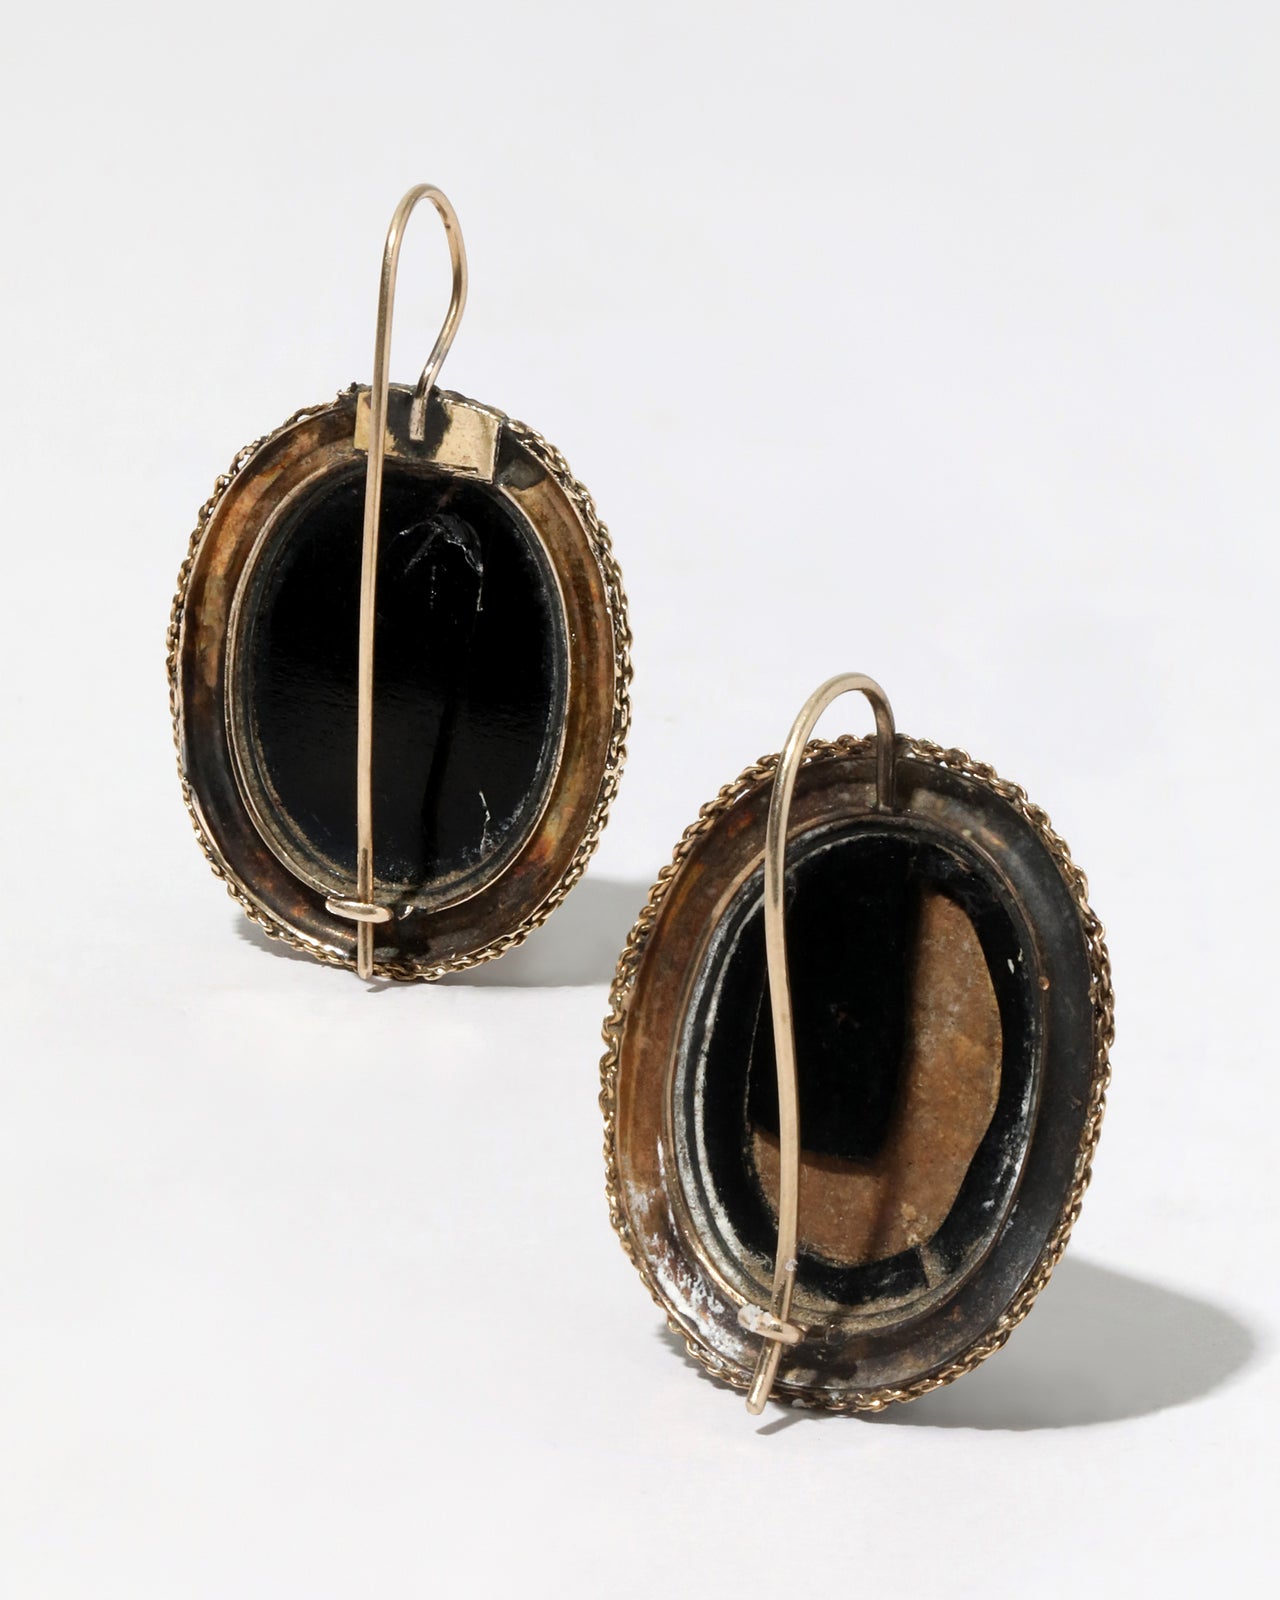 Antique 1800s 14k Gold Etruscan Micro Mosaic Earrings - Photo 2